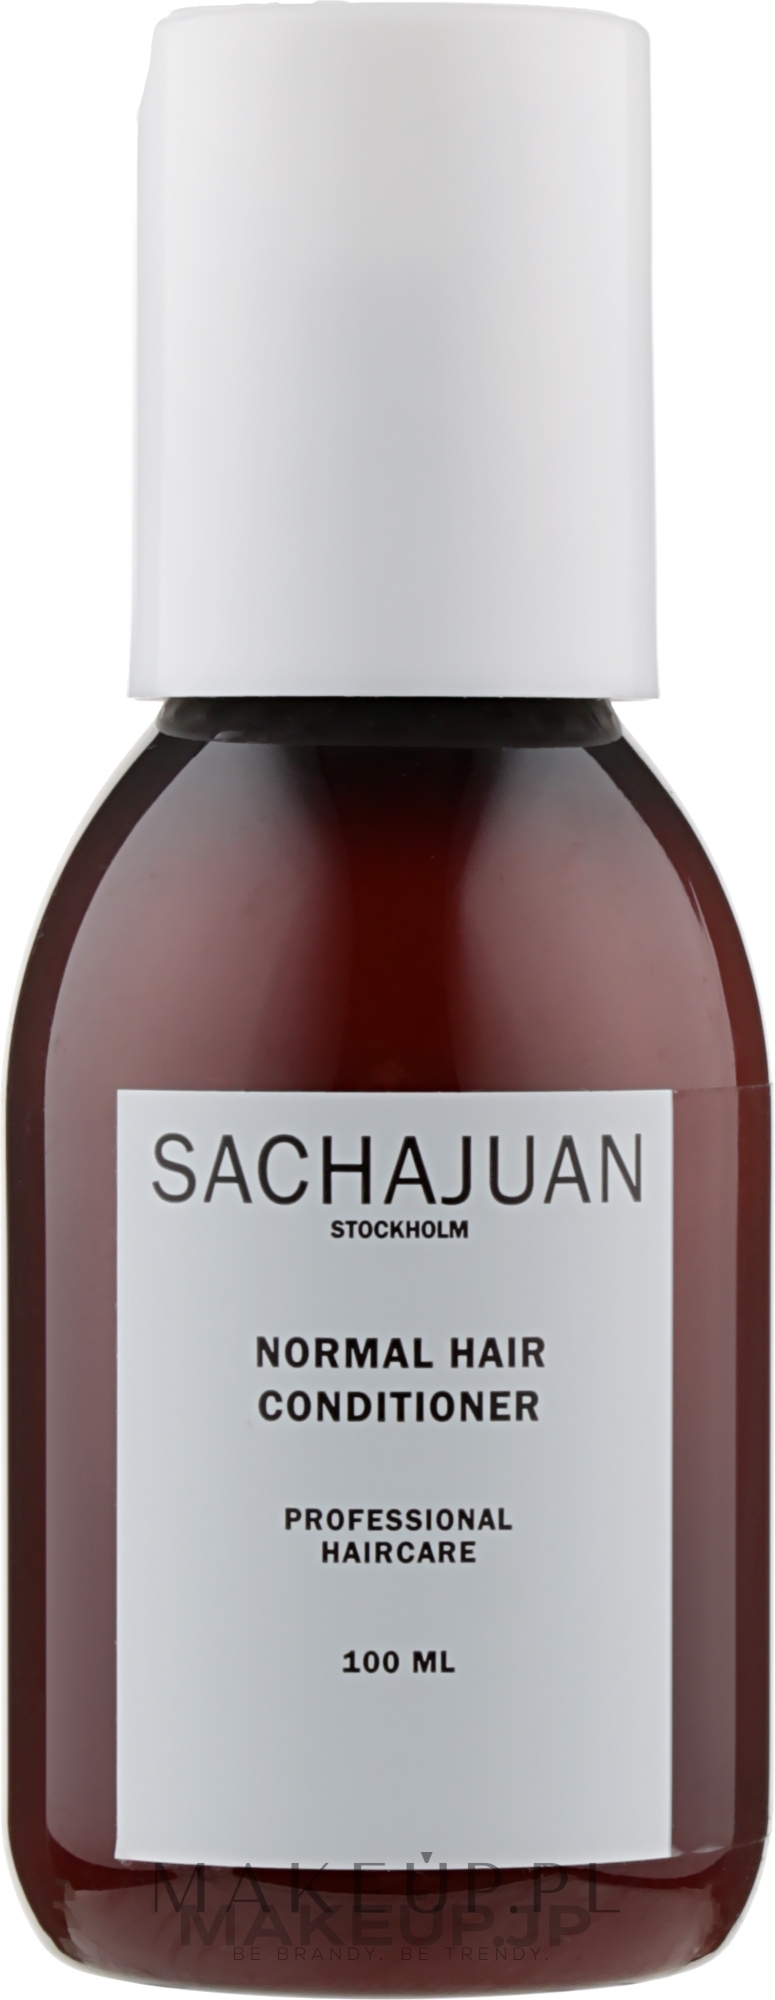 Easy Combing & Shine Conditioner for Normal Hair - Sachajuan Normal Hair Conditioner — photo 100 ml